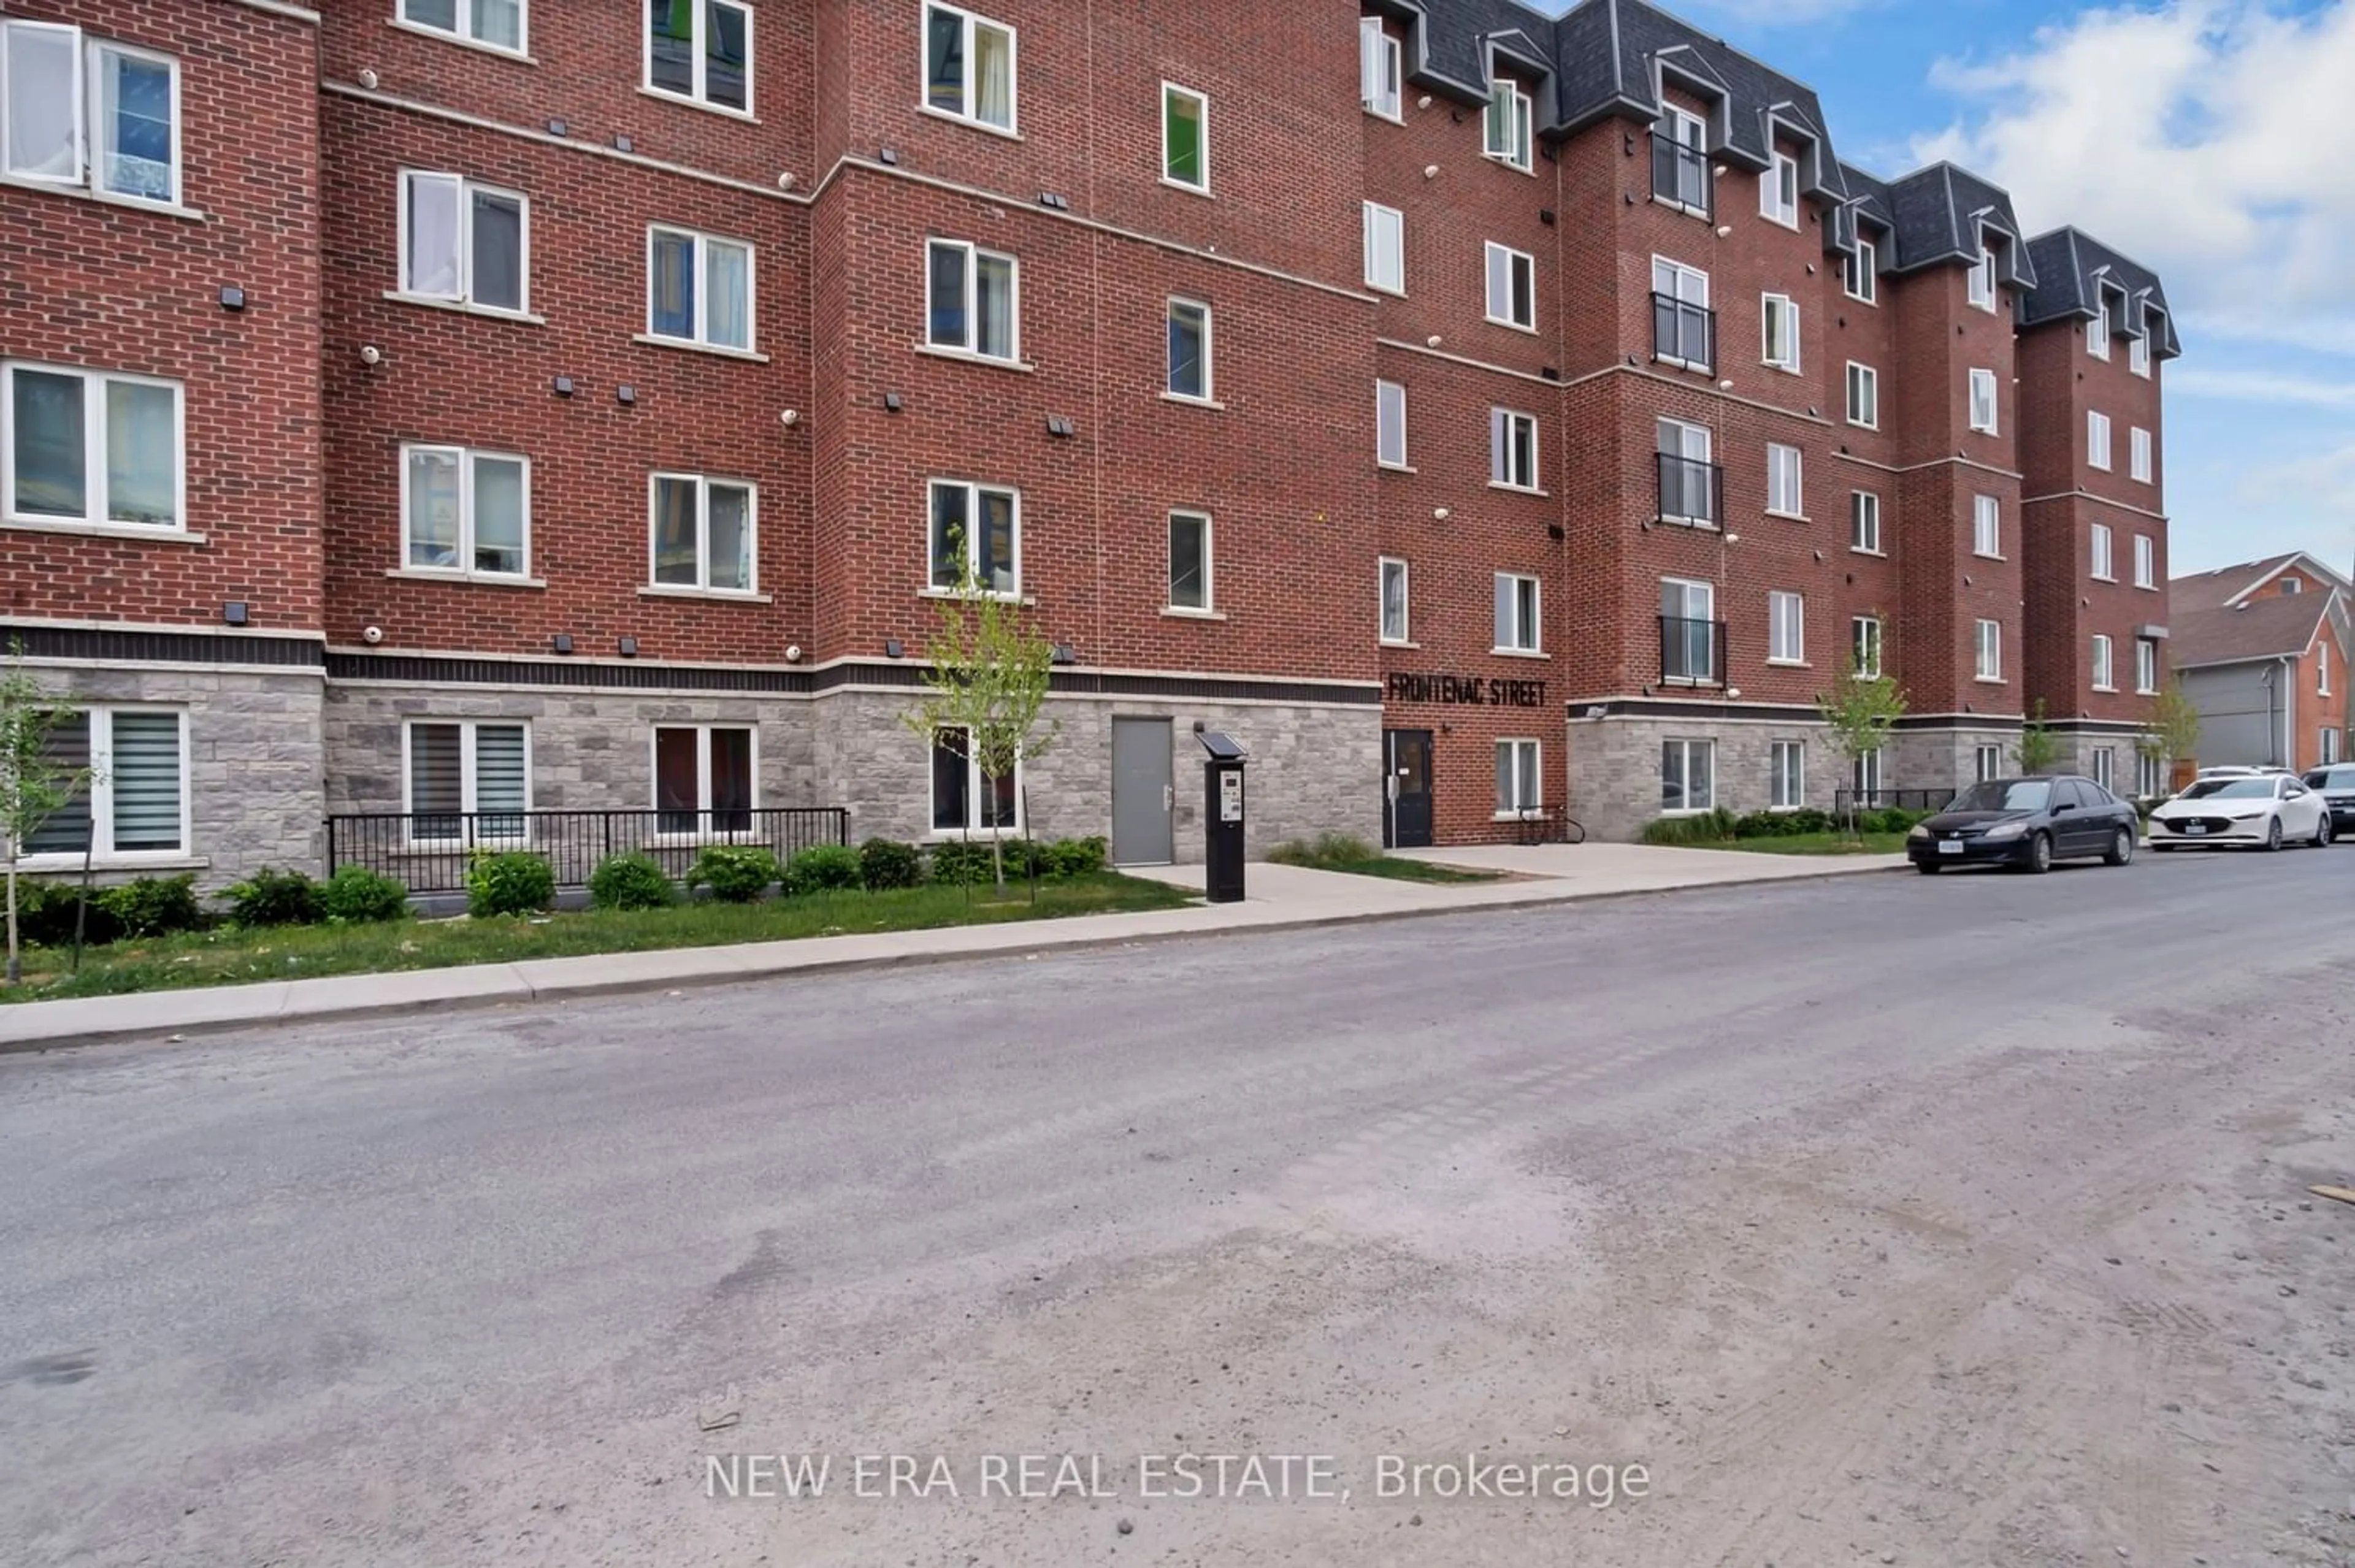 A pic from exterior of the house or condo for 501 Frontenac St #309, Kingston Ontario K7K 4L9